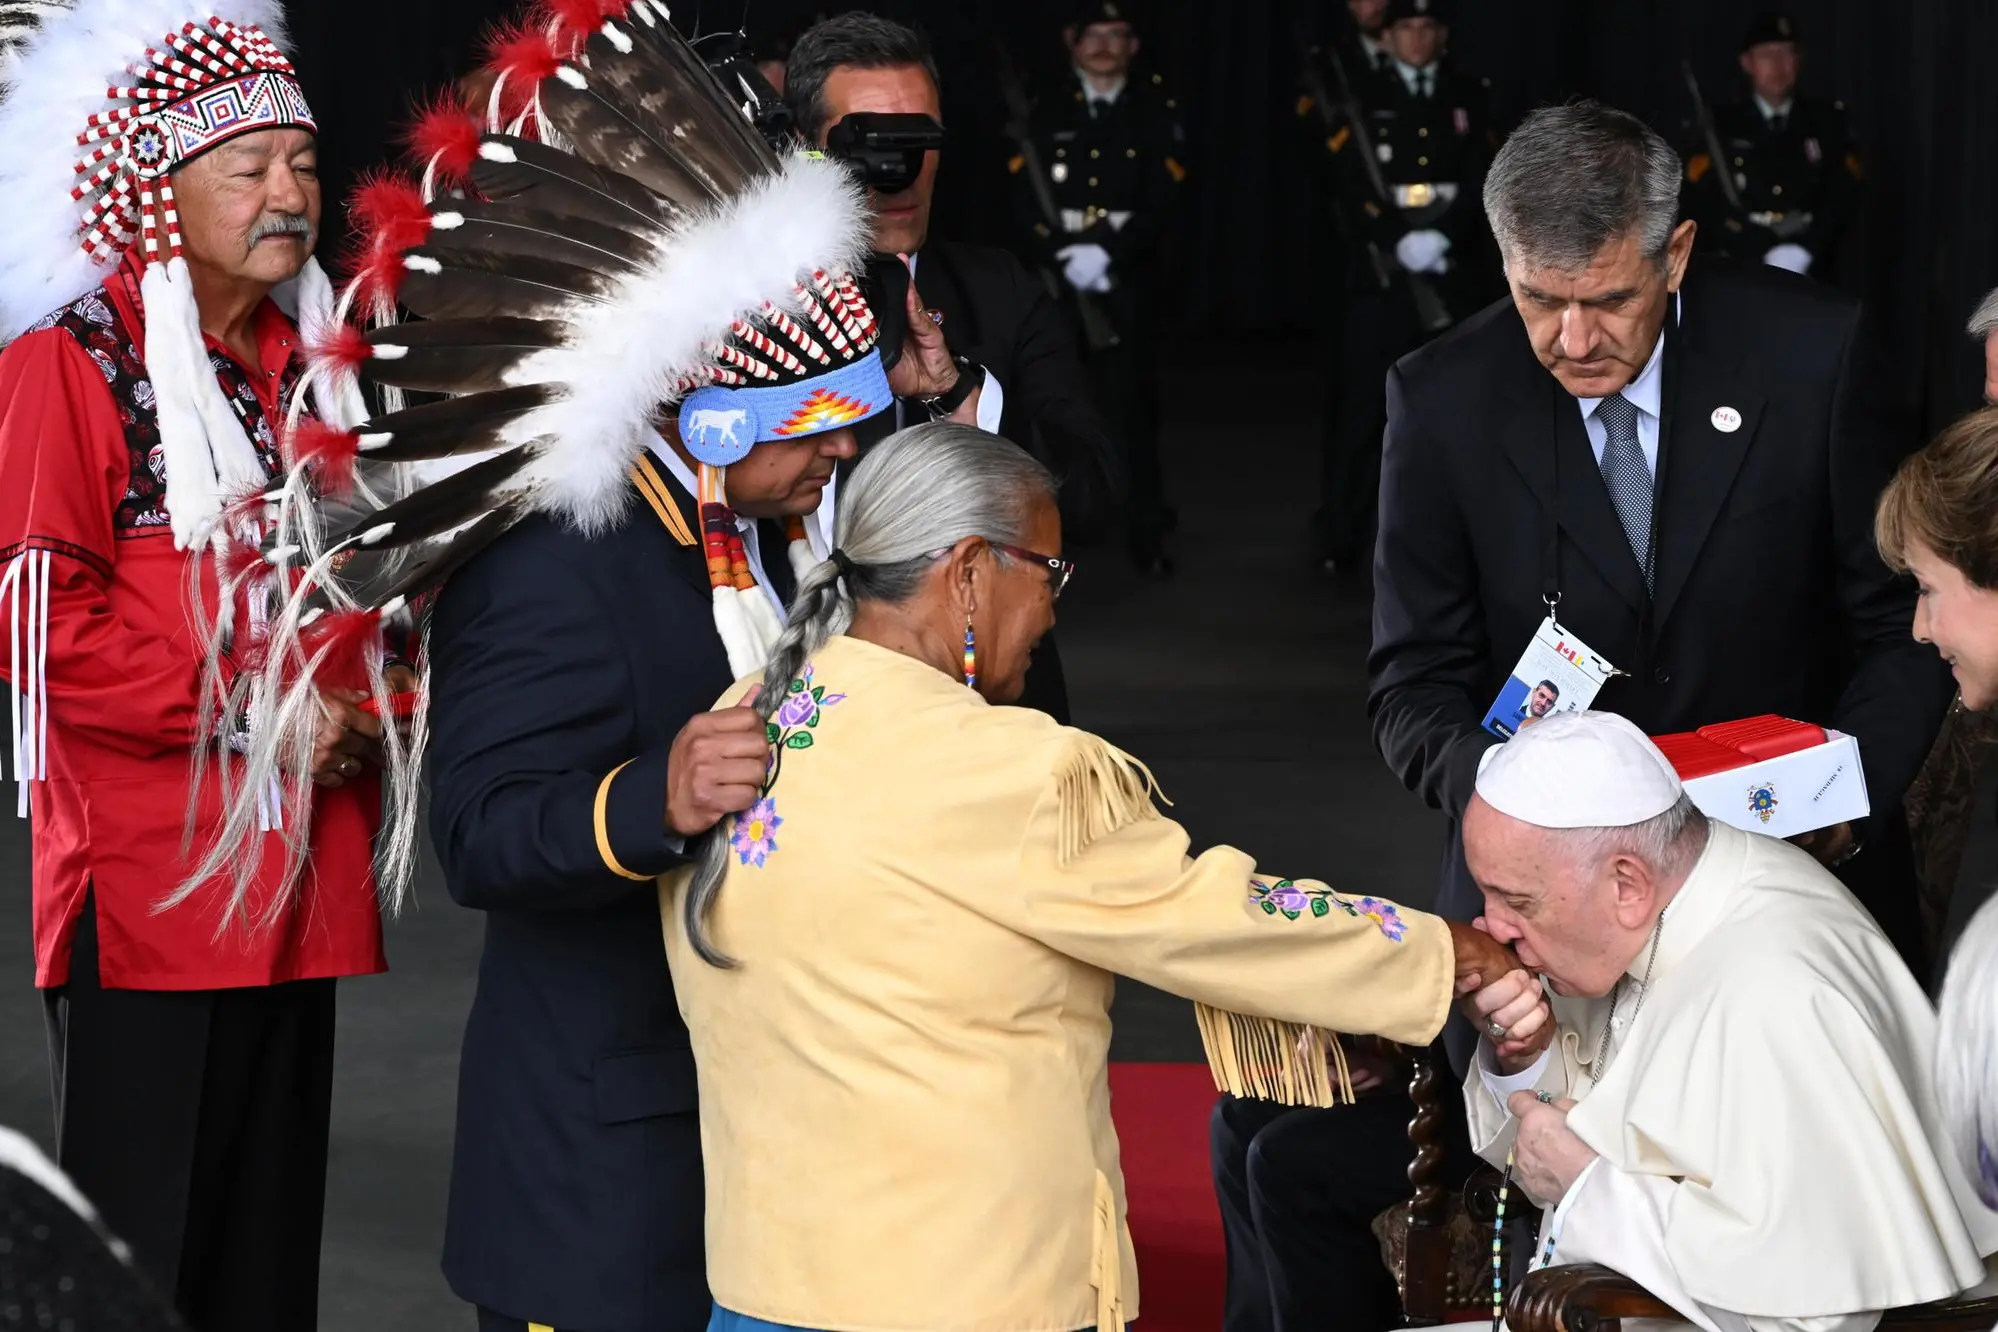 Pope Francis meets members of an indigenous tribe during his welcoming ceremony at Edmonton International Airport in Alberta, western Canada,24 July 2022. The five-days visit is the first papal visit to Canada in 20 years. ANSA/CIRO FUSCO